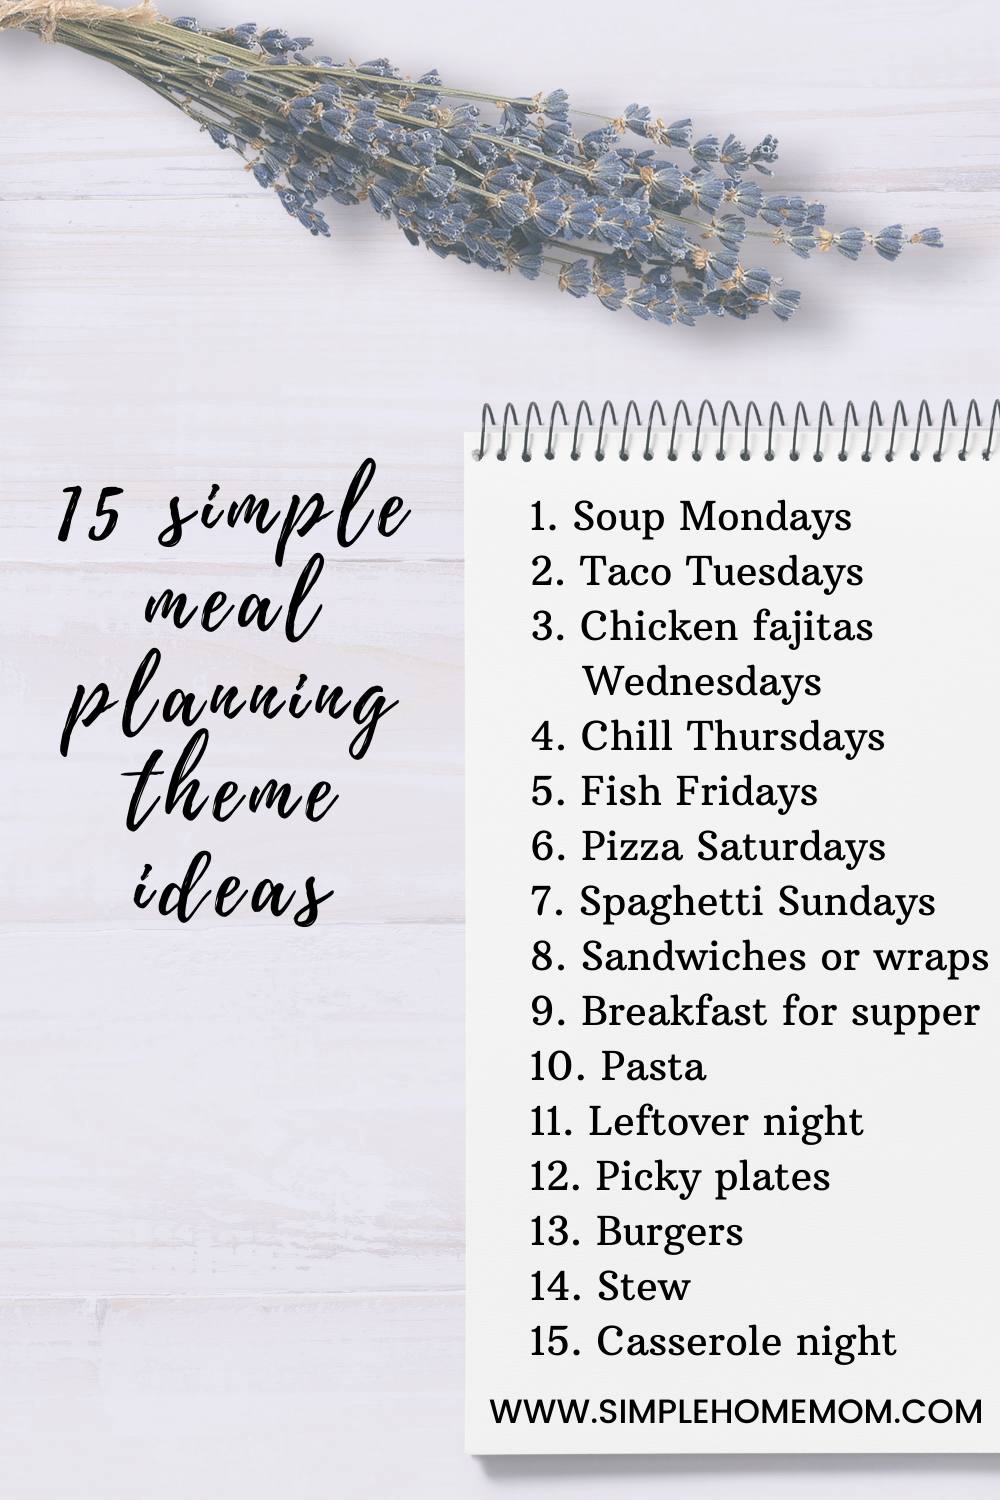 Pen to meal plan on paper with the 15 ideas.